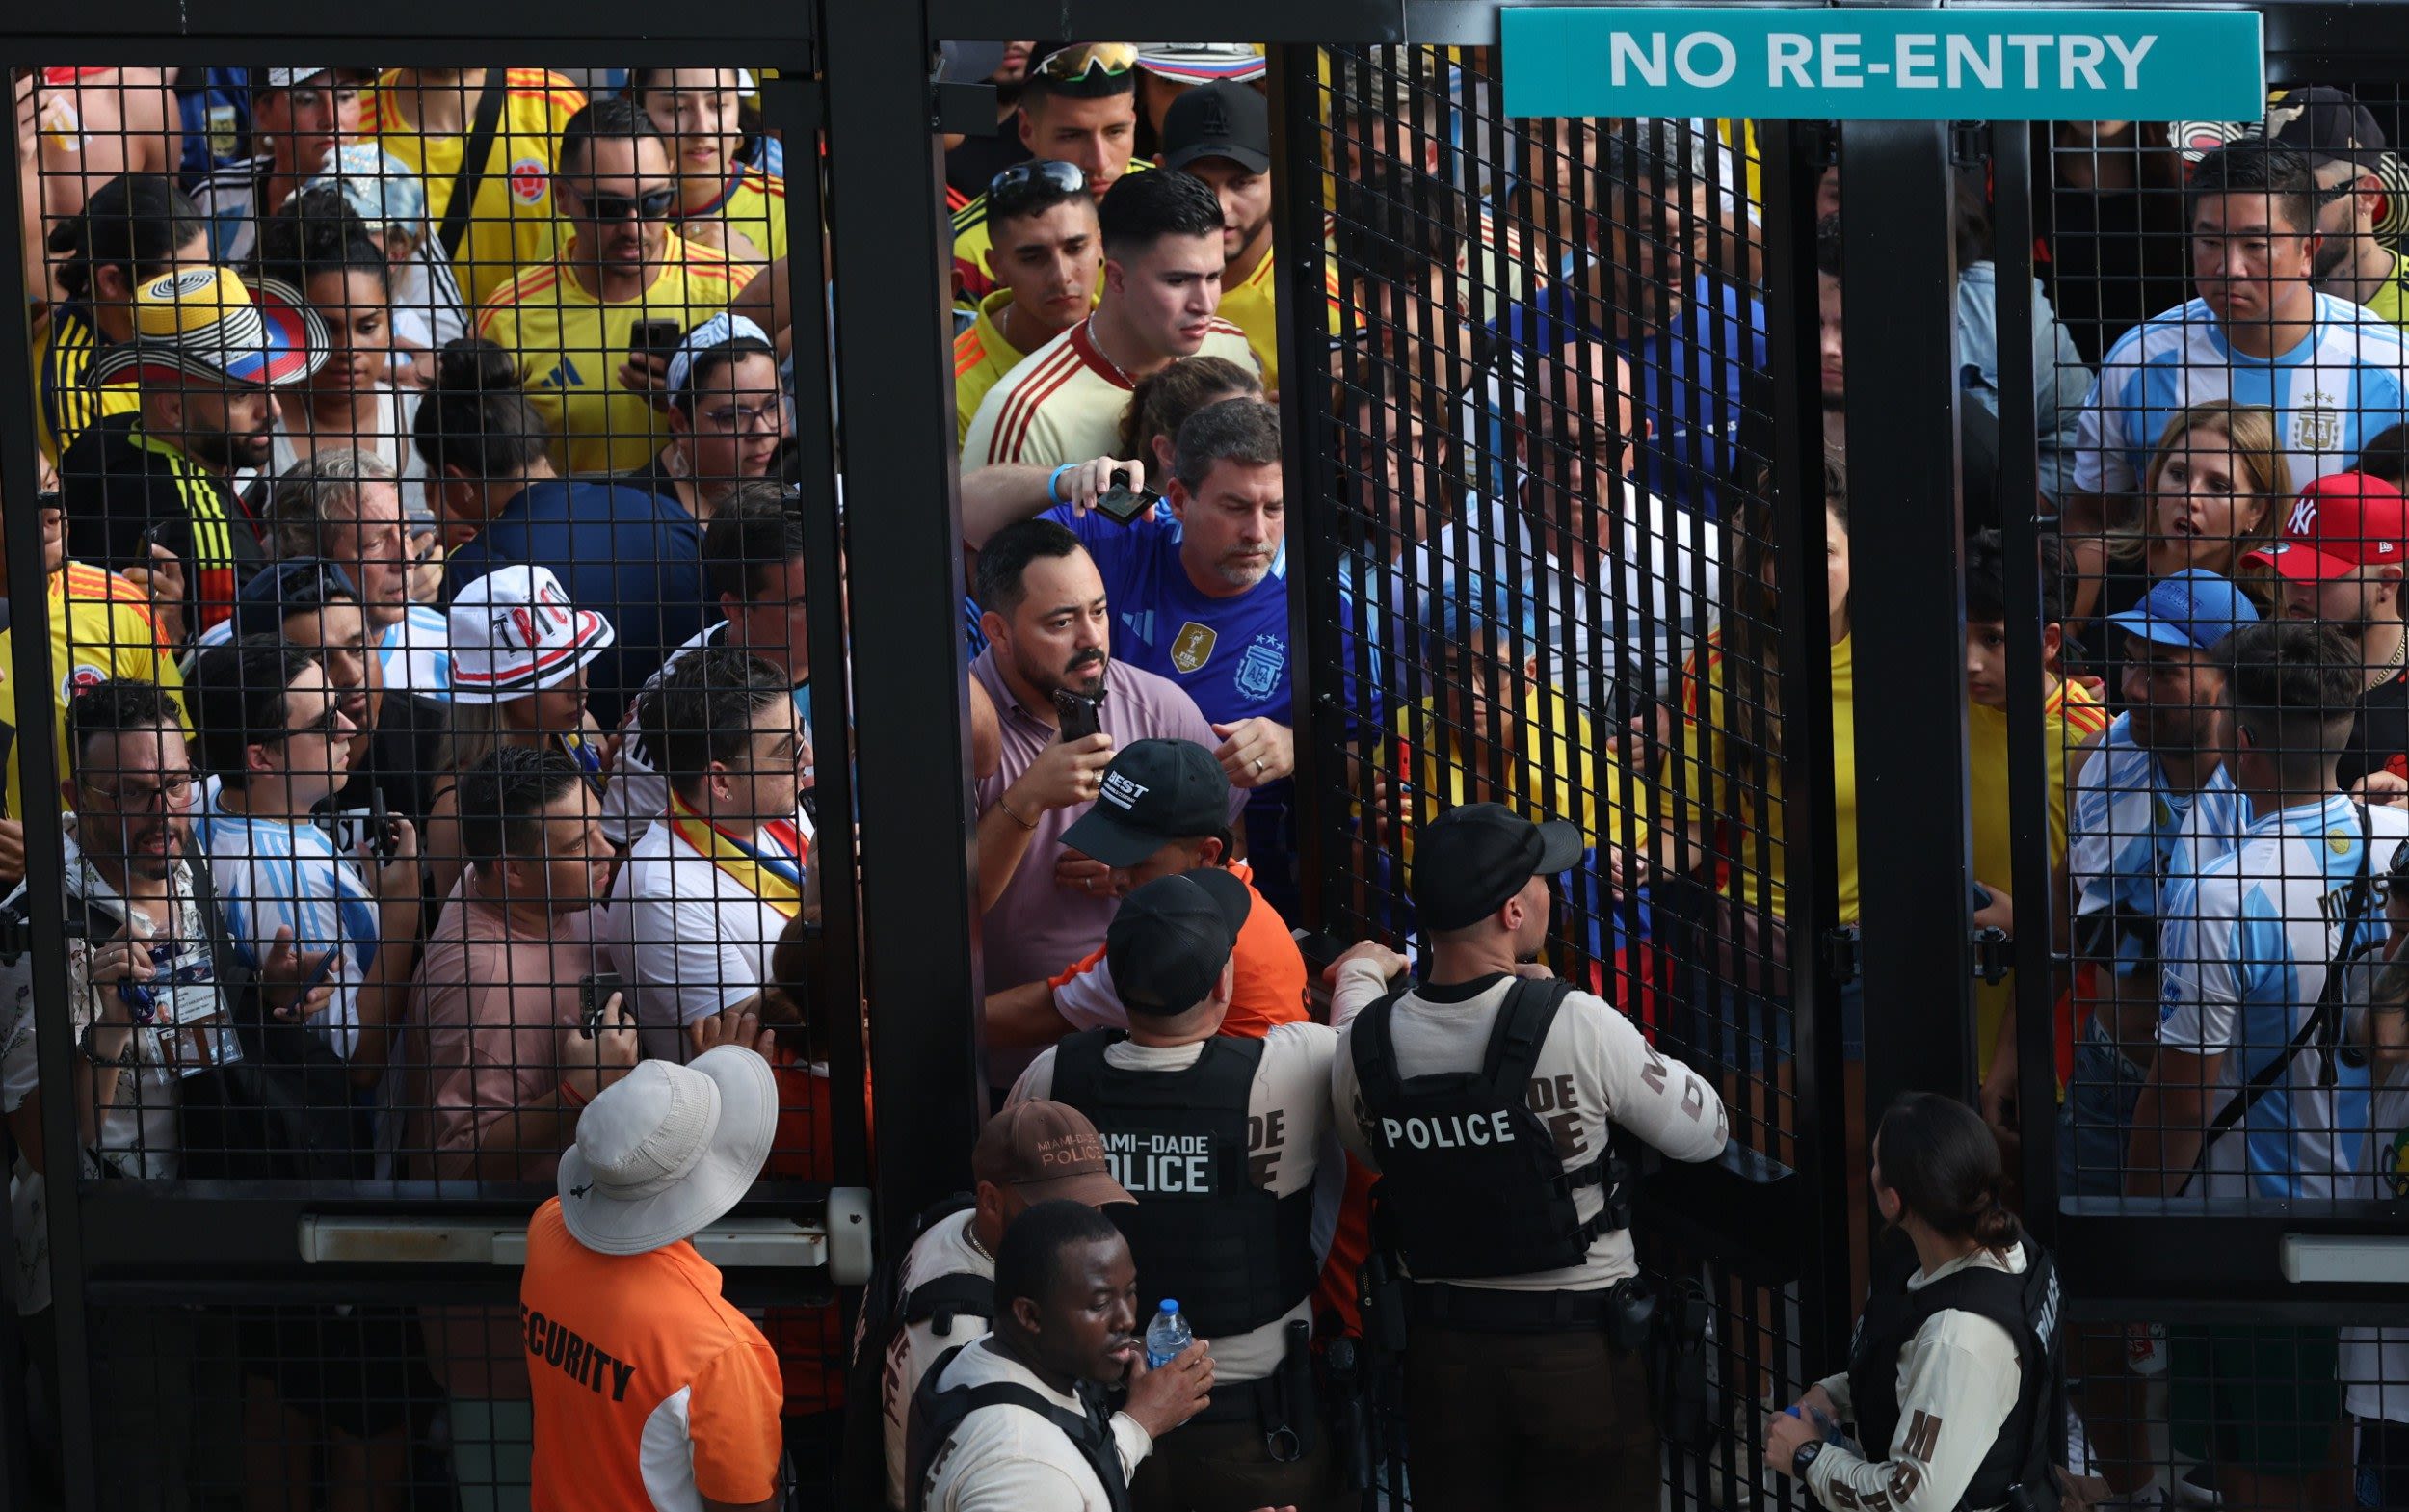 Copa America final delayed after ‘unruly fans’ breach security gates